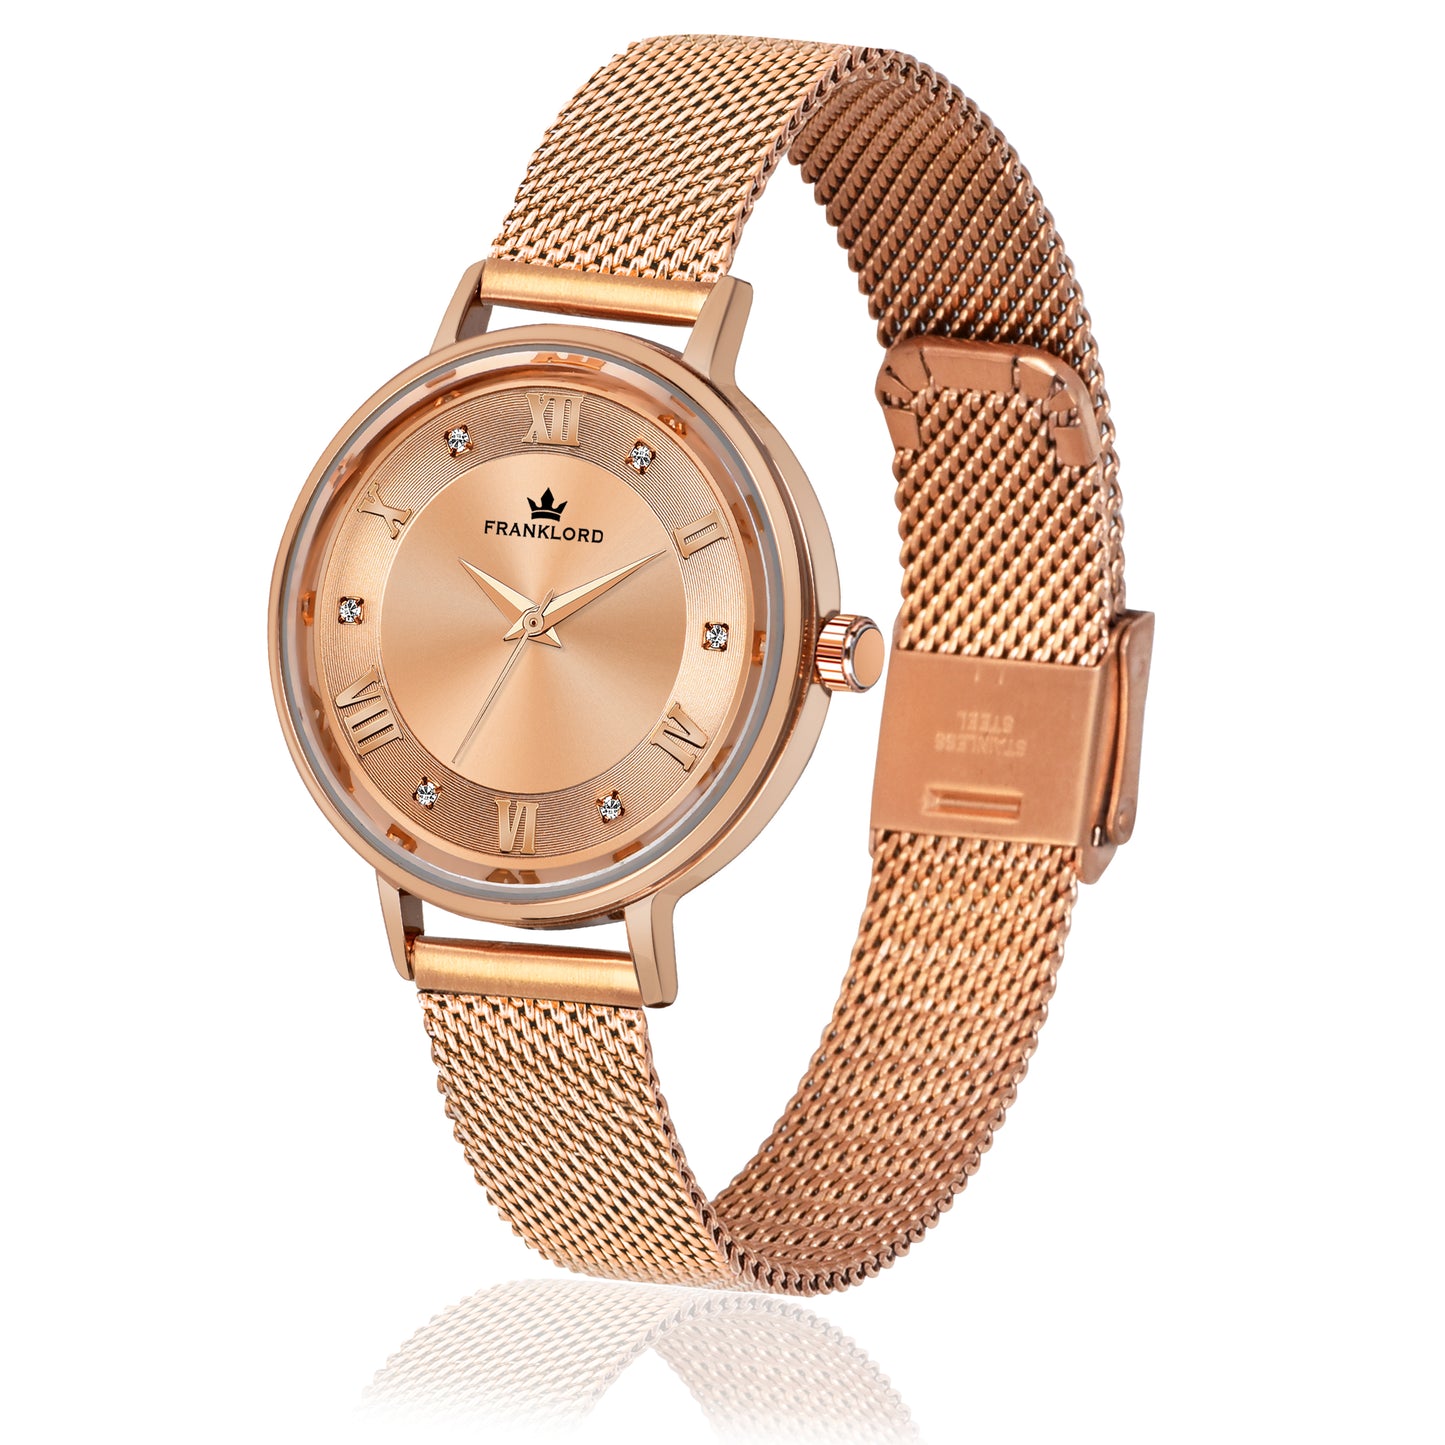 ROMEO & JUILET III -Rose Gold -Passion's Promise Watch For Women F-132 RRL